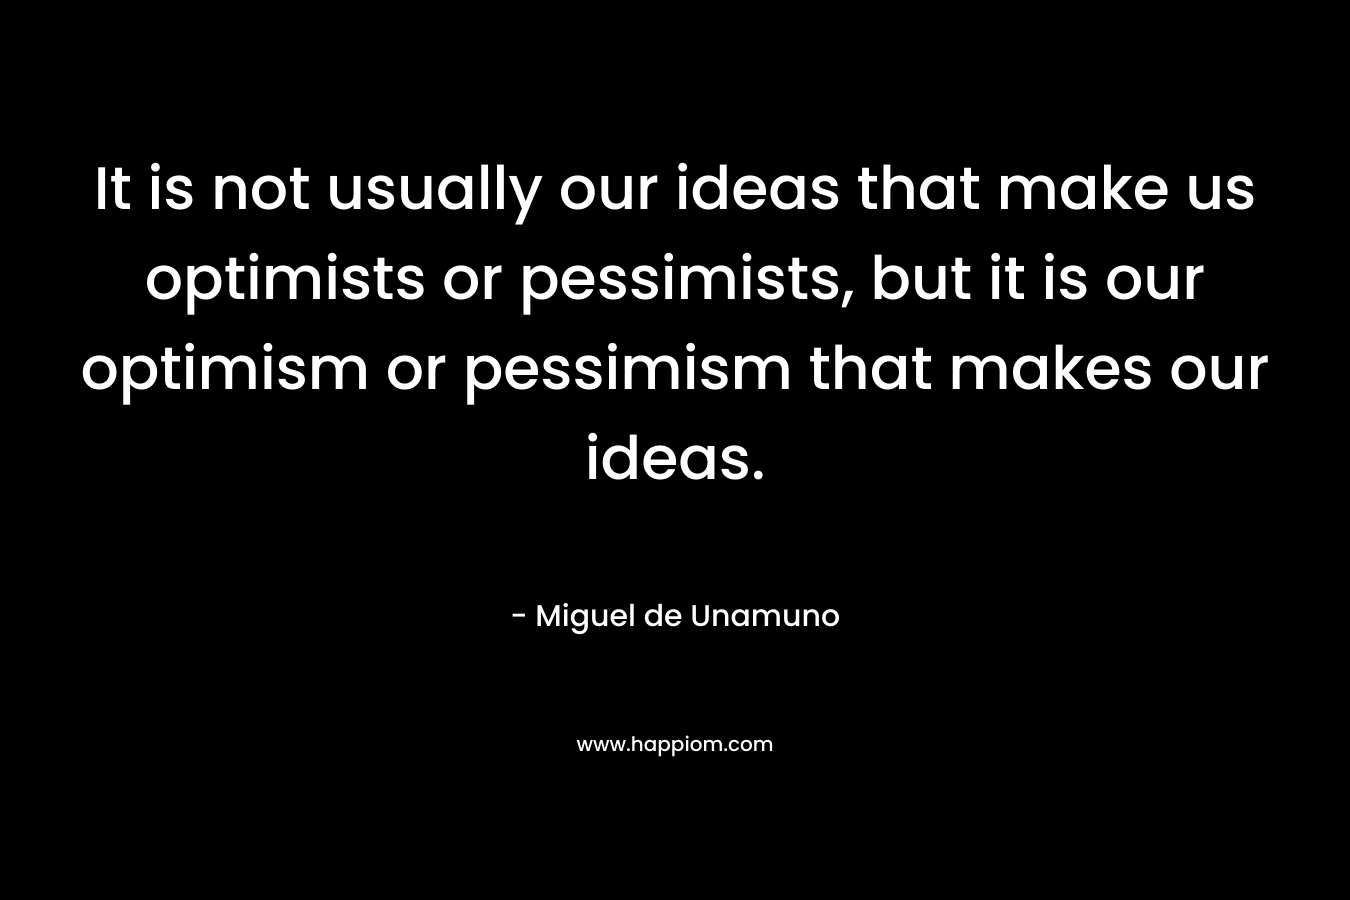 It is not usually our ideas that make us optimists or pessimists, but it is our optimism or pessimism that makes our ideas. – Miguel de Unamuno